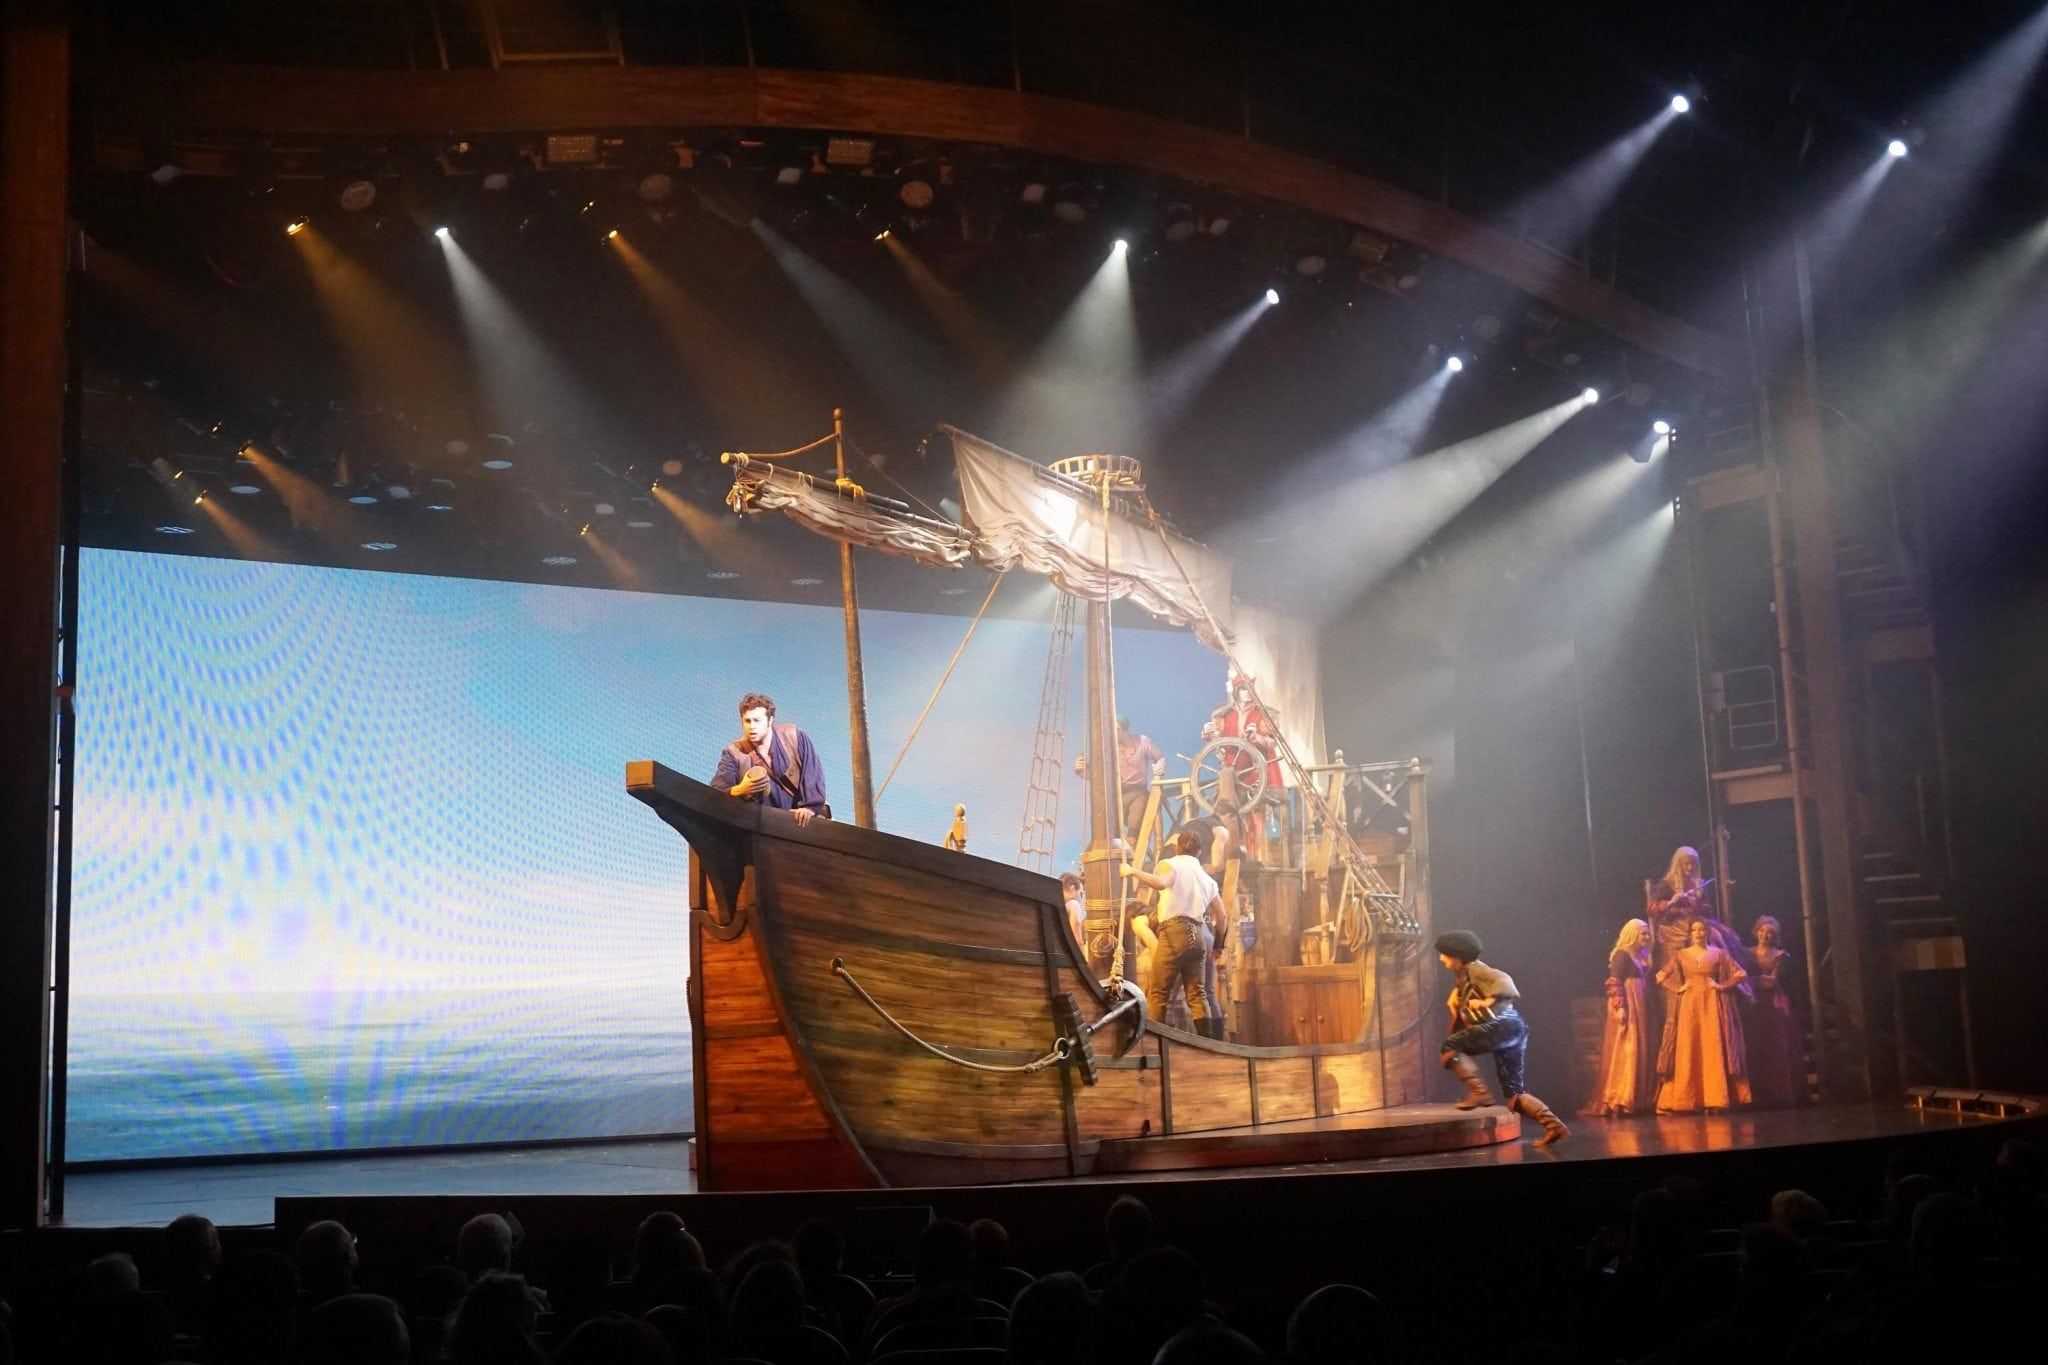 Columbus the Musical on Harmony of the Seas